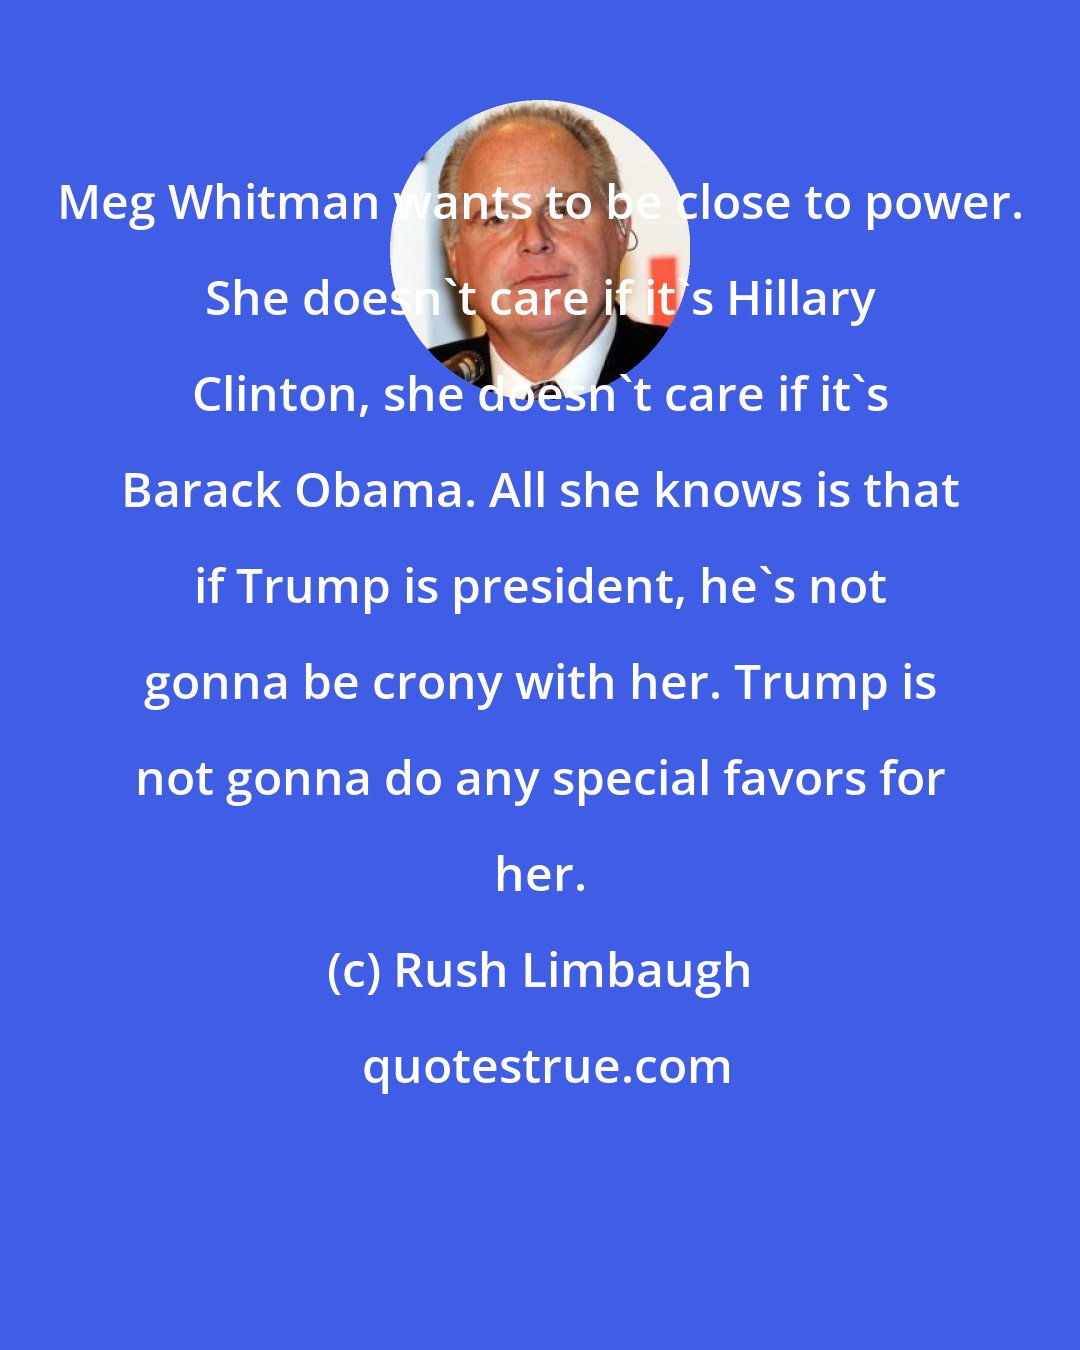 Rush Limbaugh: Meg Whitman wants to be close to power. She doesn't care if it's Hillary Clinton, she doesn't care if it's Barack Obama. All she knows is that if Trump is president, he's not gonna be crony with her. Trump is not gonna do any special favors for her.